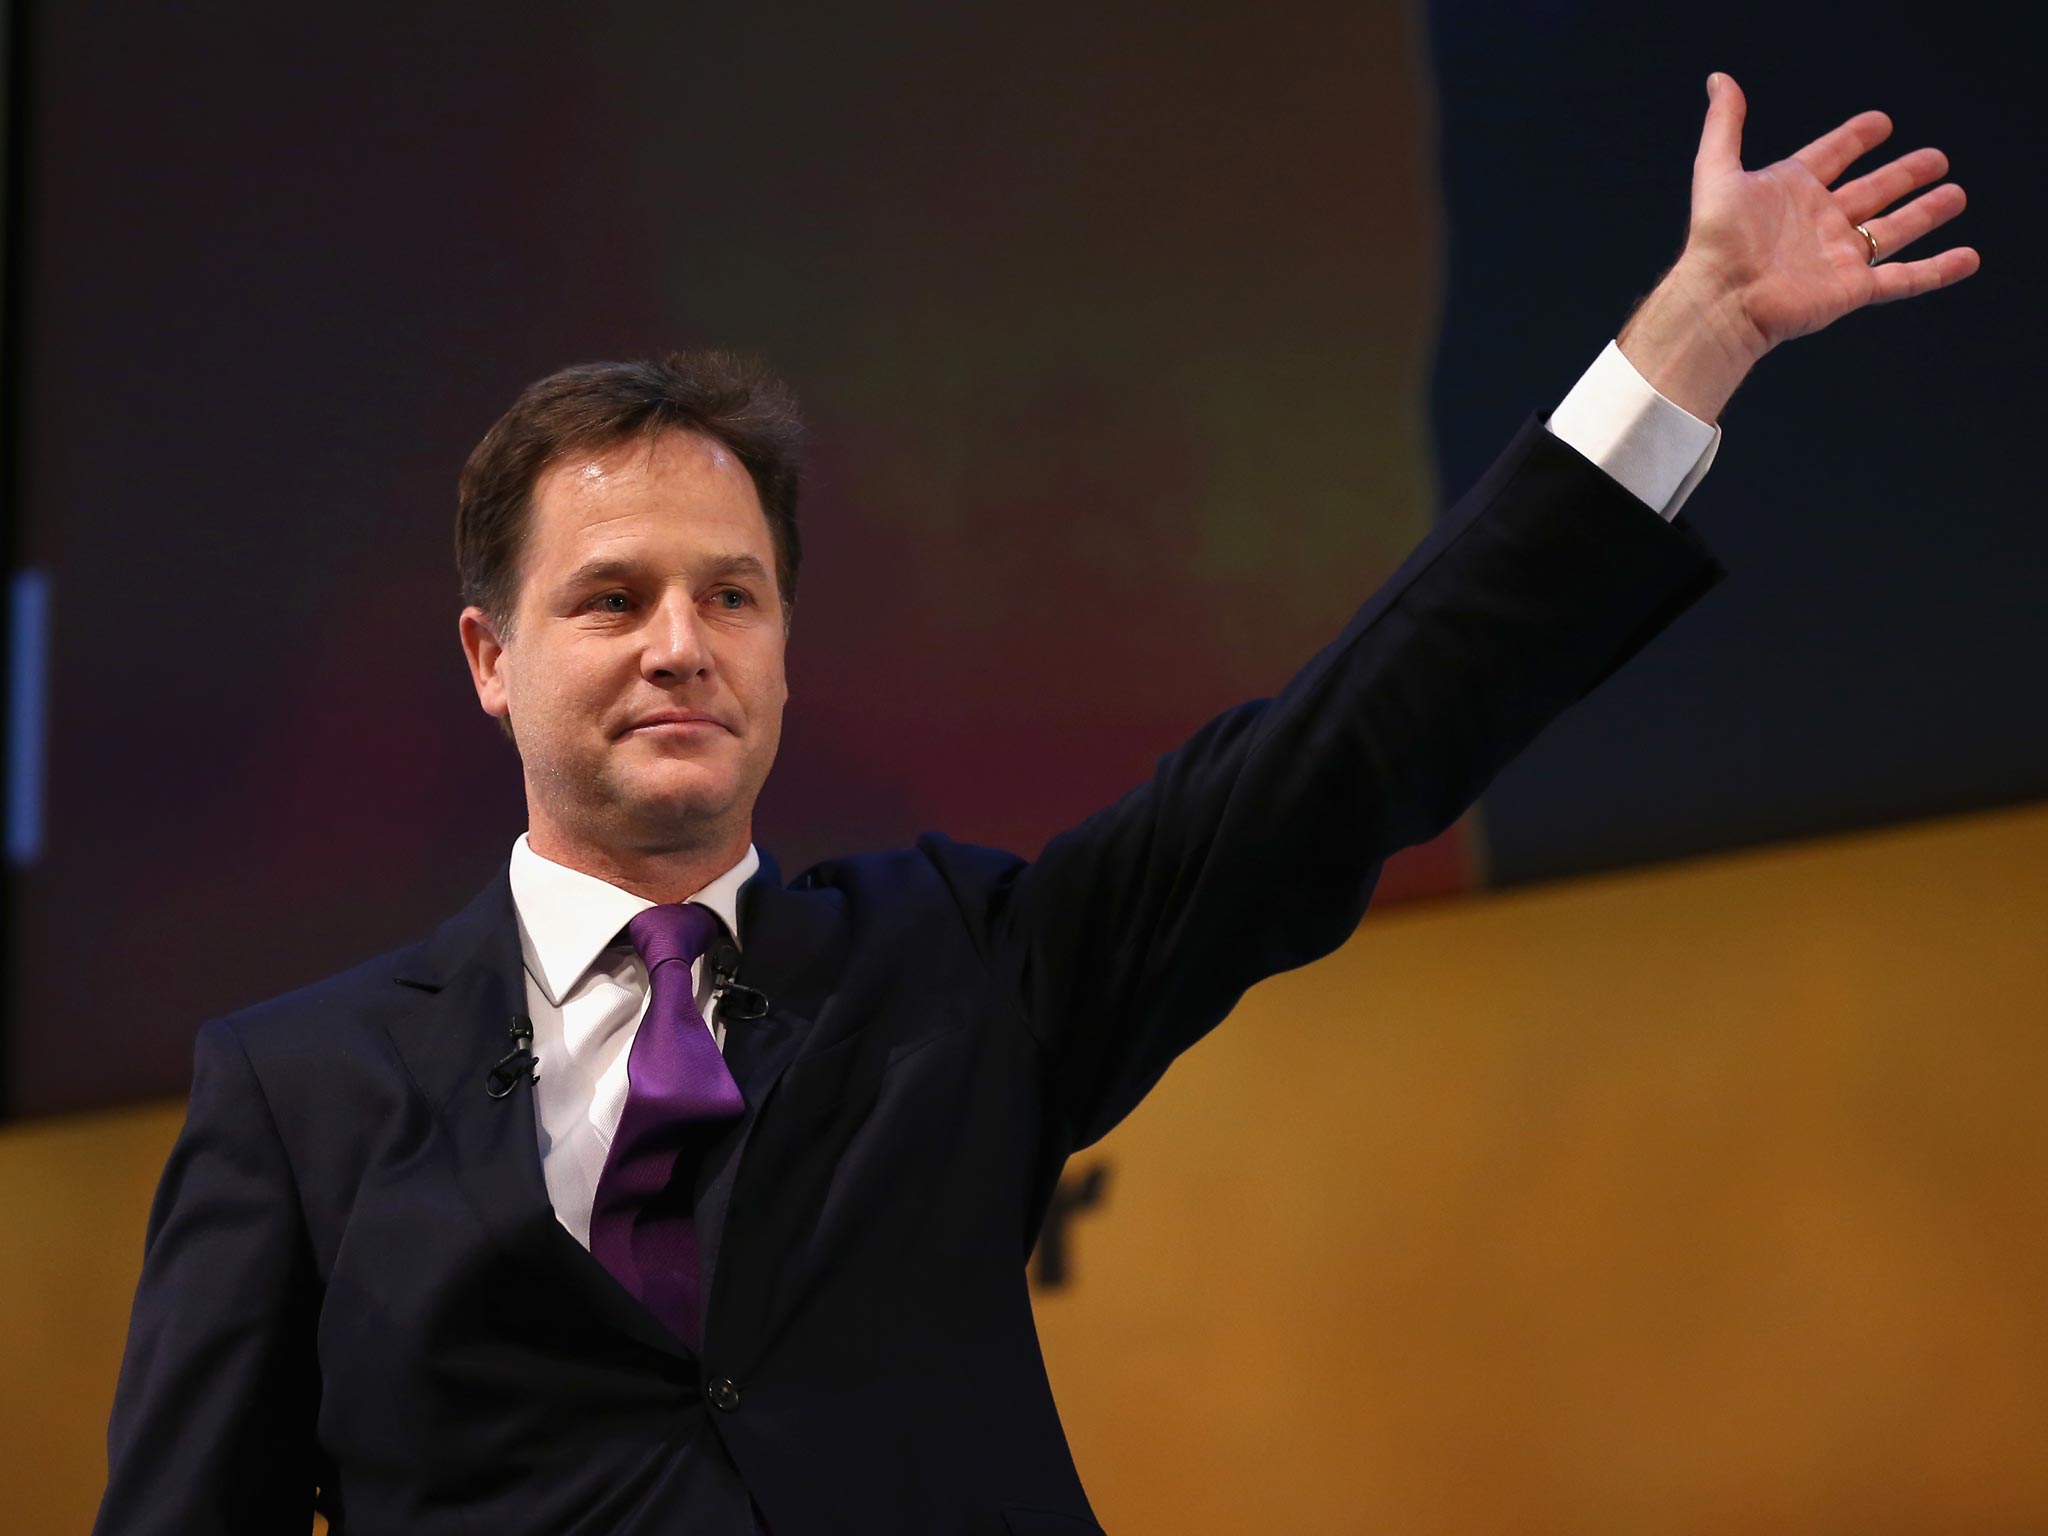 Nick Clegg said the Liberal Democrats remain committed to balancing the nation's books